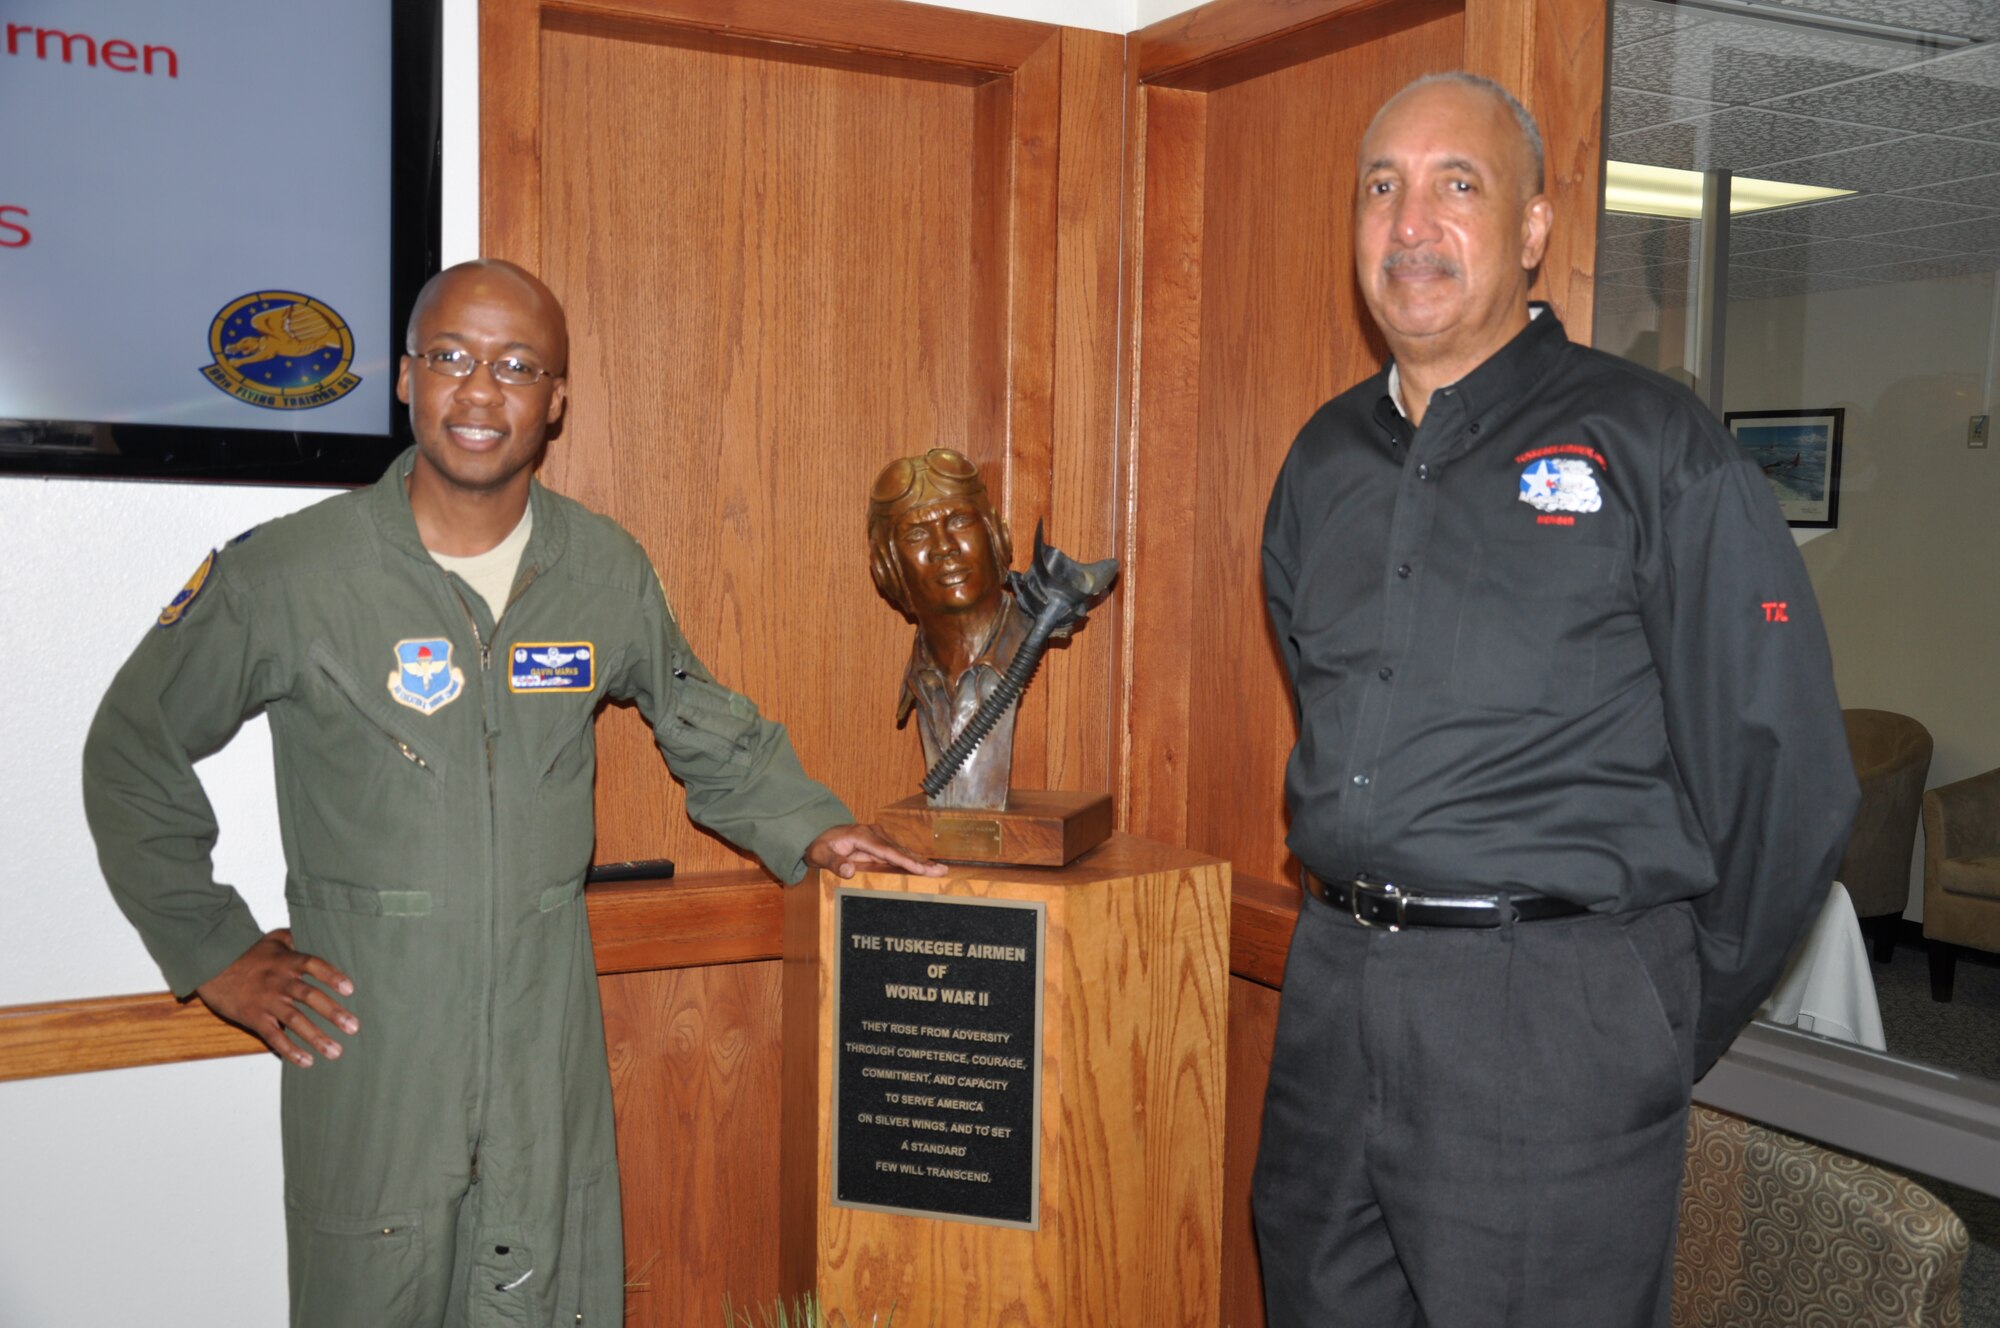 Lt. Col. Gavin Marks, 99th Flying Training Squadron commander, and Ralph
Sinkfield, President of the San Antonio Chapter, Tuskegee Airmen, Inc.,
stand by a Tuskegee Airman statue in the 99th FTS building at Joint Base San
Antonio-Randolph Feb. 19, 2014. The 99th FTS traces its historical lineage
to the 99th Pursuit Squadron, the first African American fighter squadron in
the Army Air Force and the first to deploy overseas. (U.S. Air Force photo
by Capt. Jennifer Richard)
